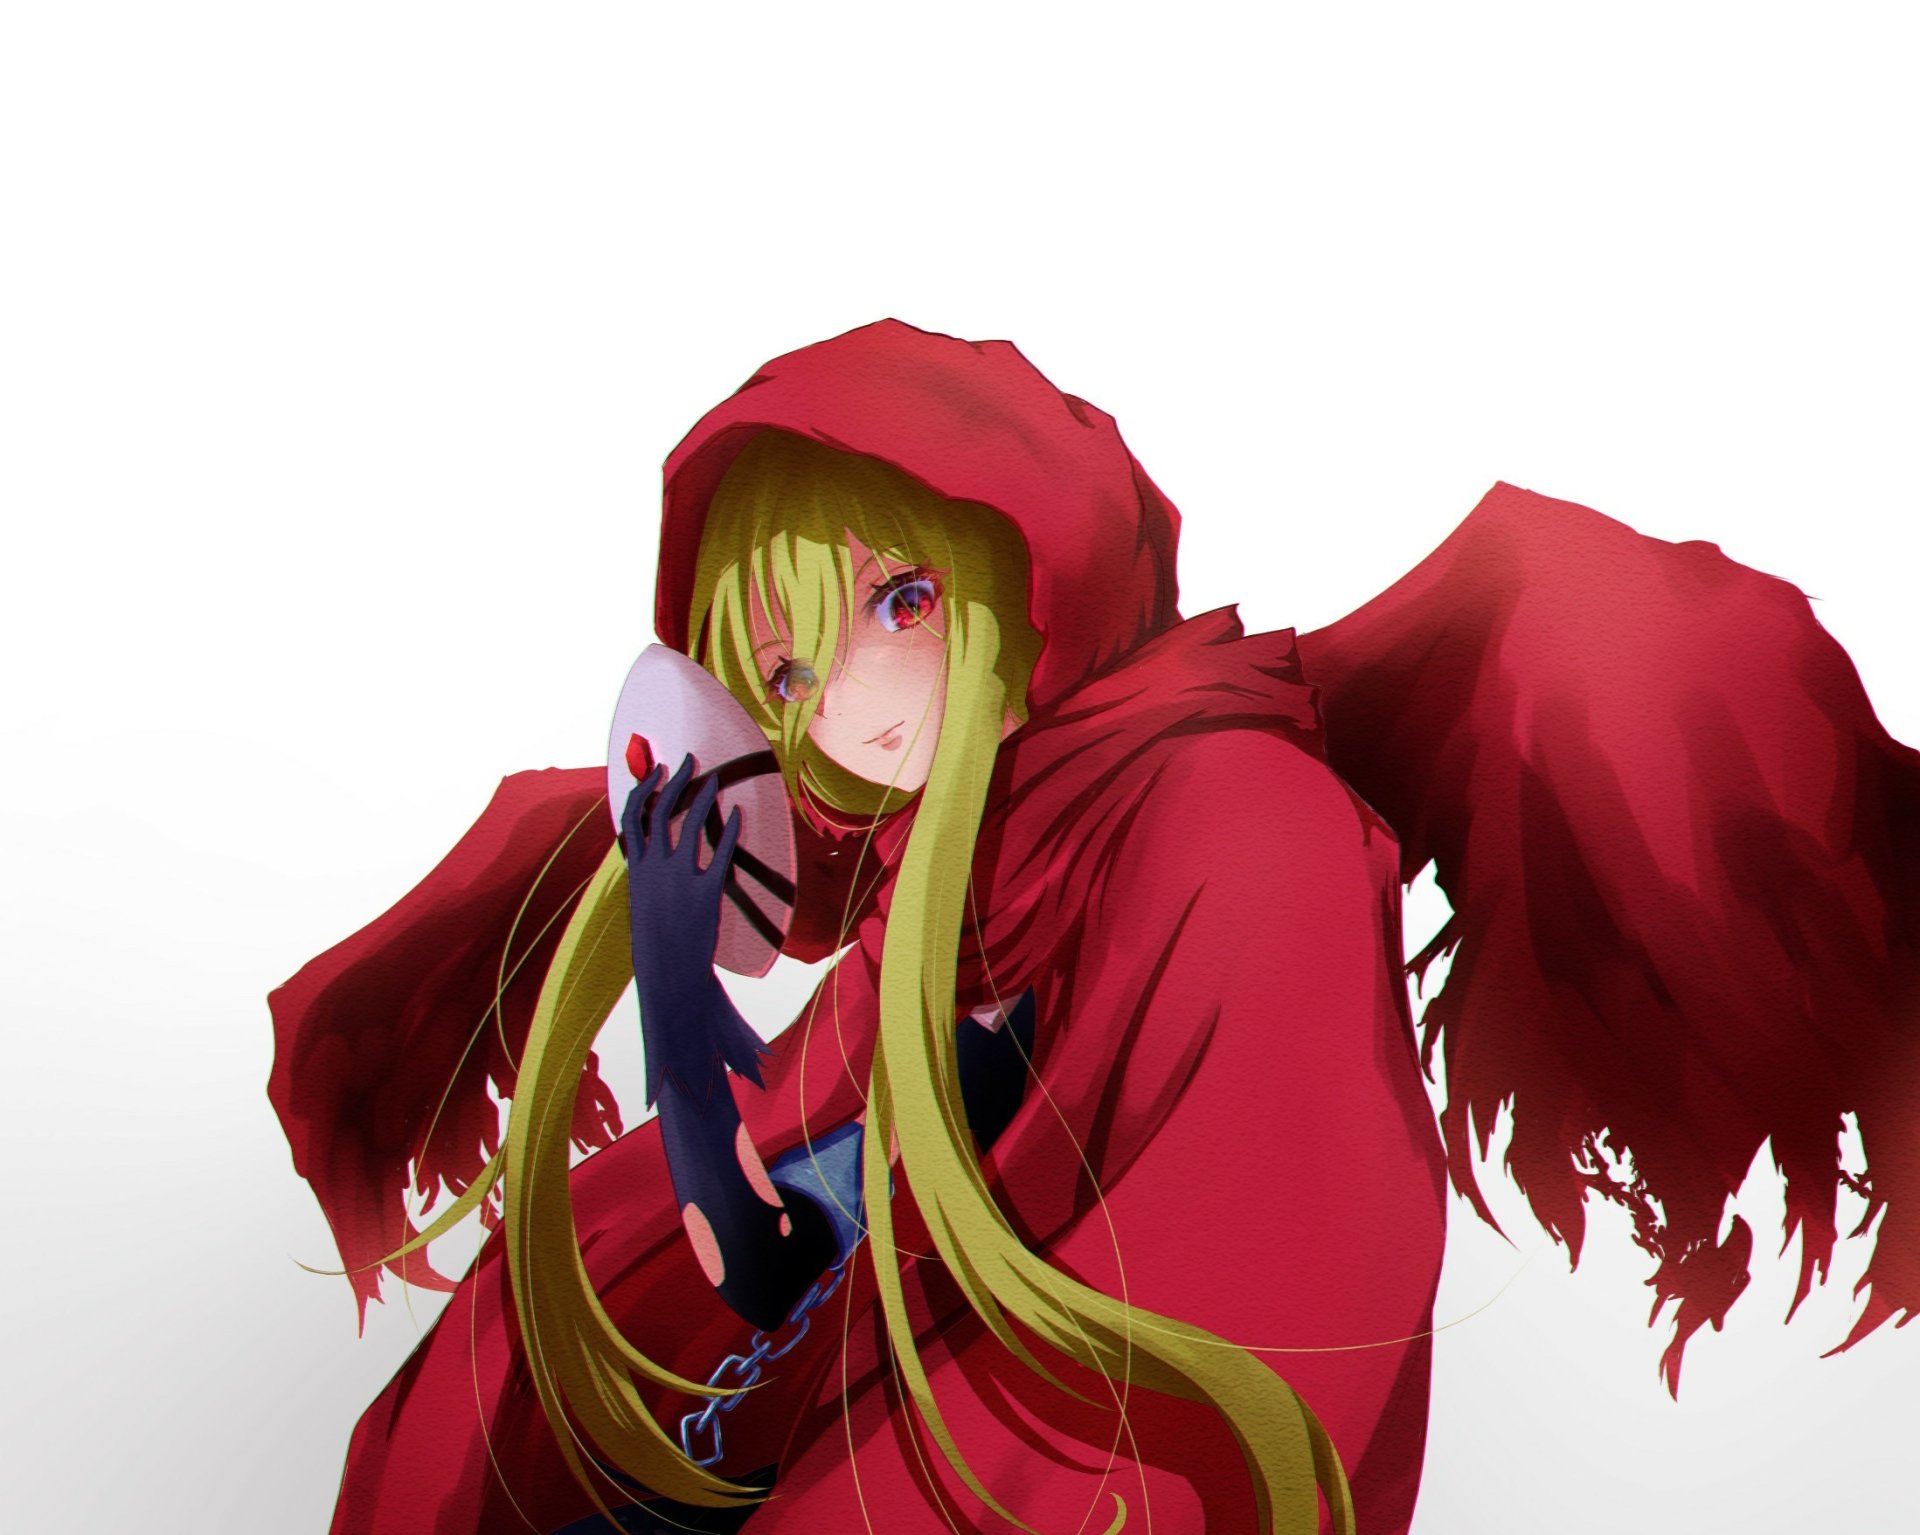 Evileye (Overlord) (1212x800 274 kB.)  Anime, Animes wallpapers,  Personagens